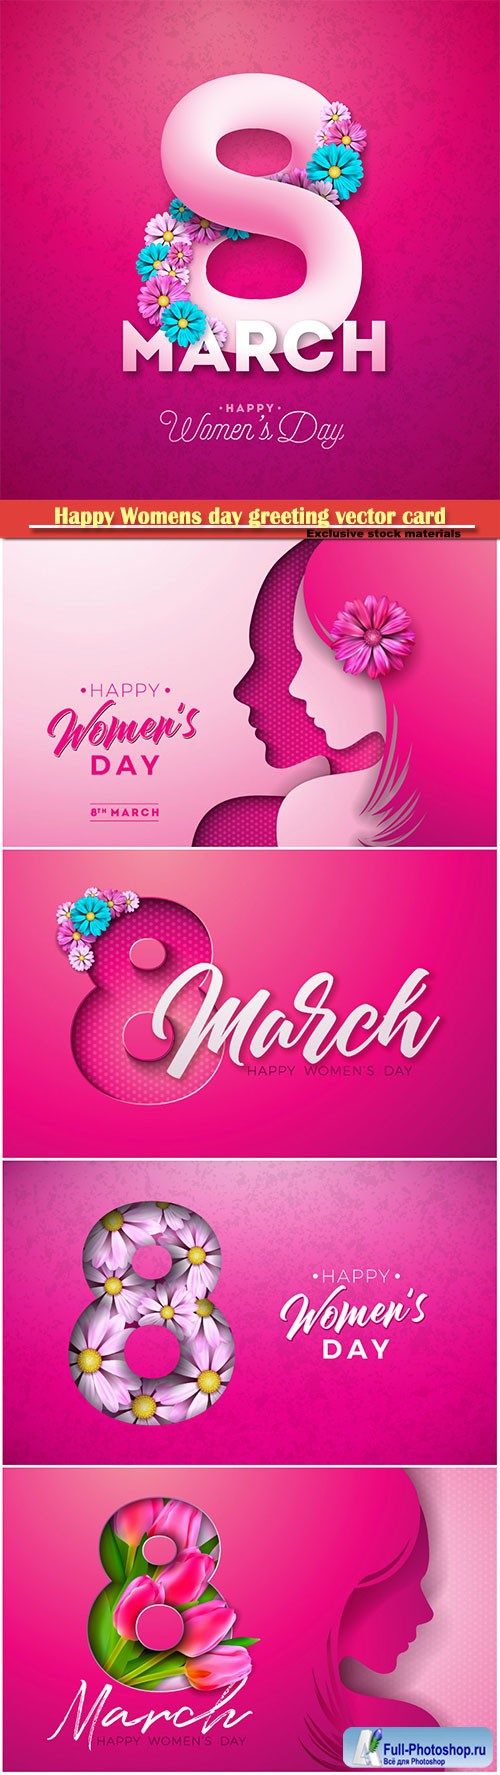 Happy Womens day floral greeting vector card design # 2